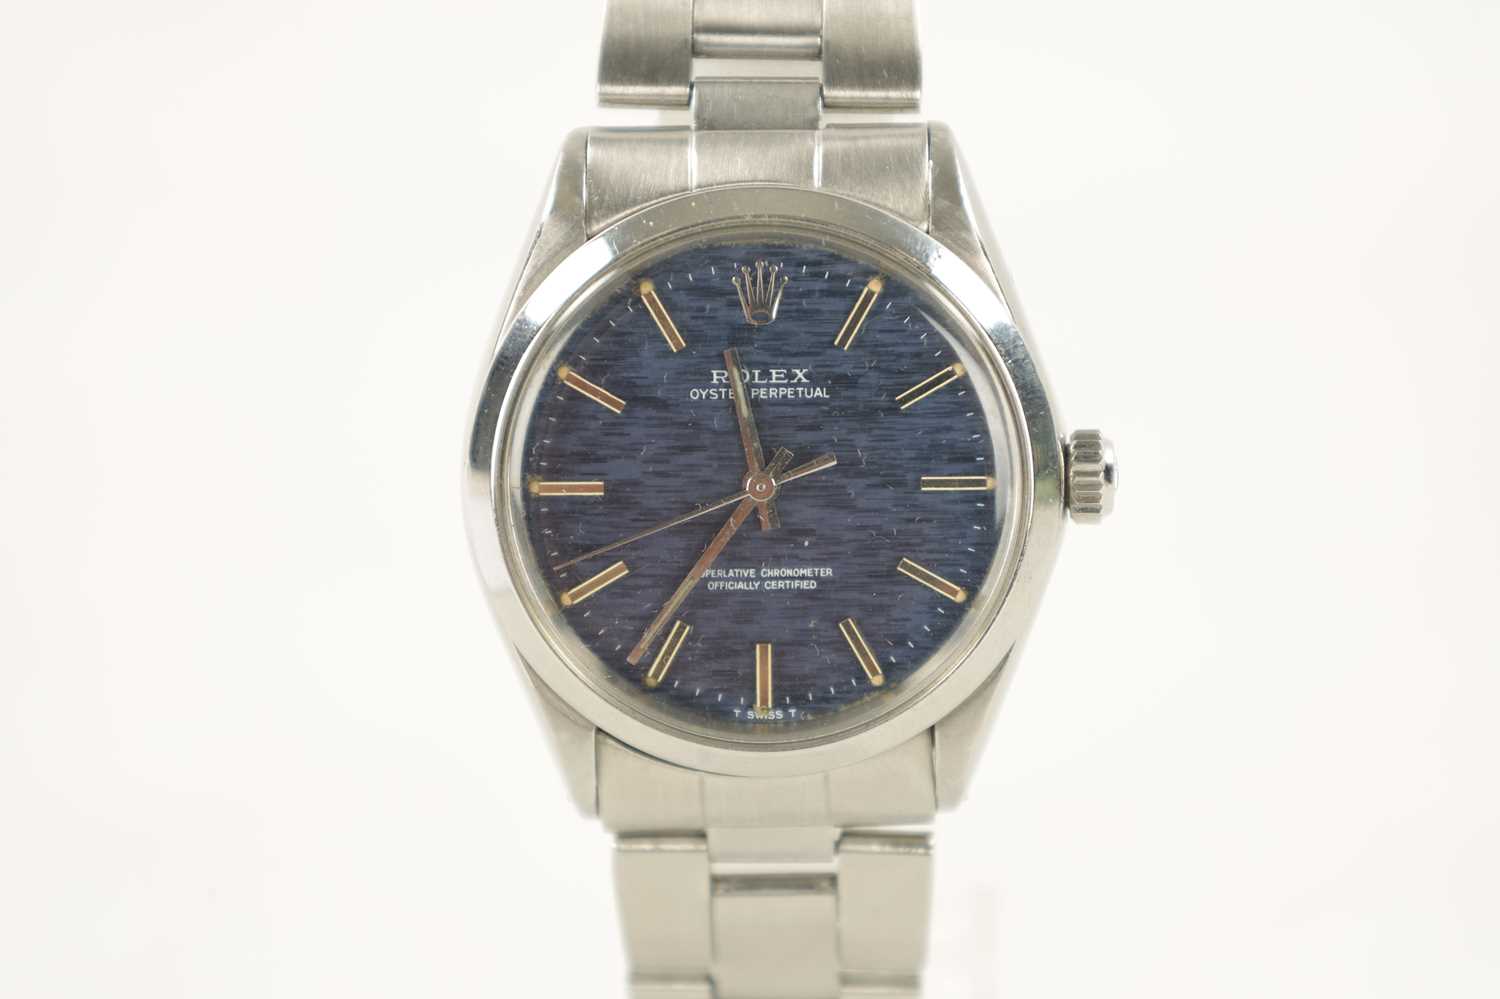 A GENTLEMAN’S 1970’S STEEL ROLEX OYSTER WRISTWATCH WITH RARE MOSAIC DIAL - Image 10 of 10